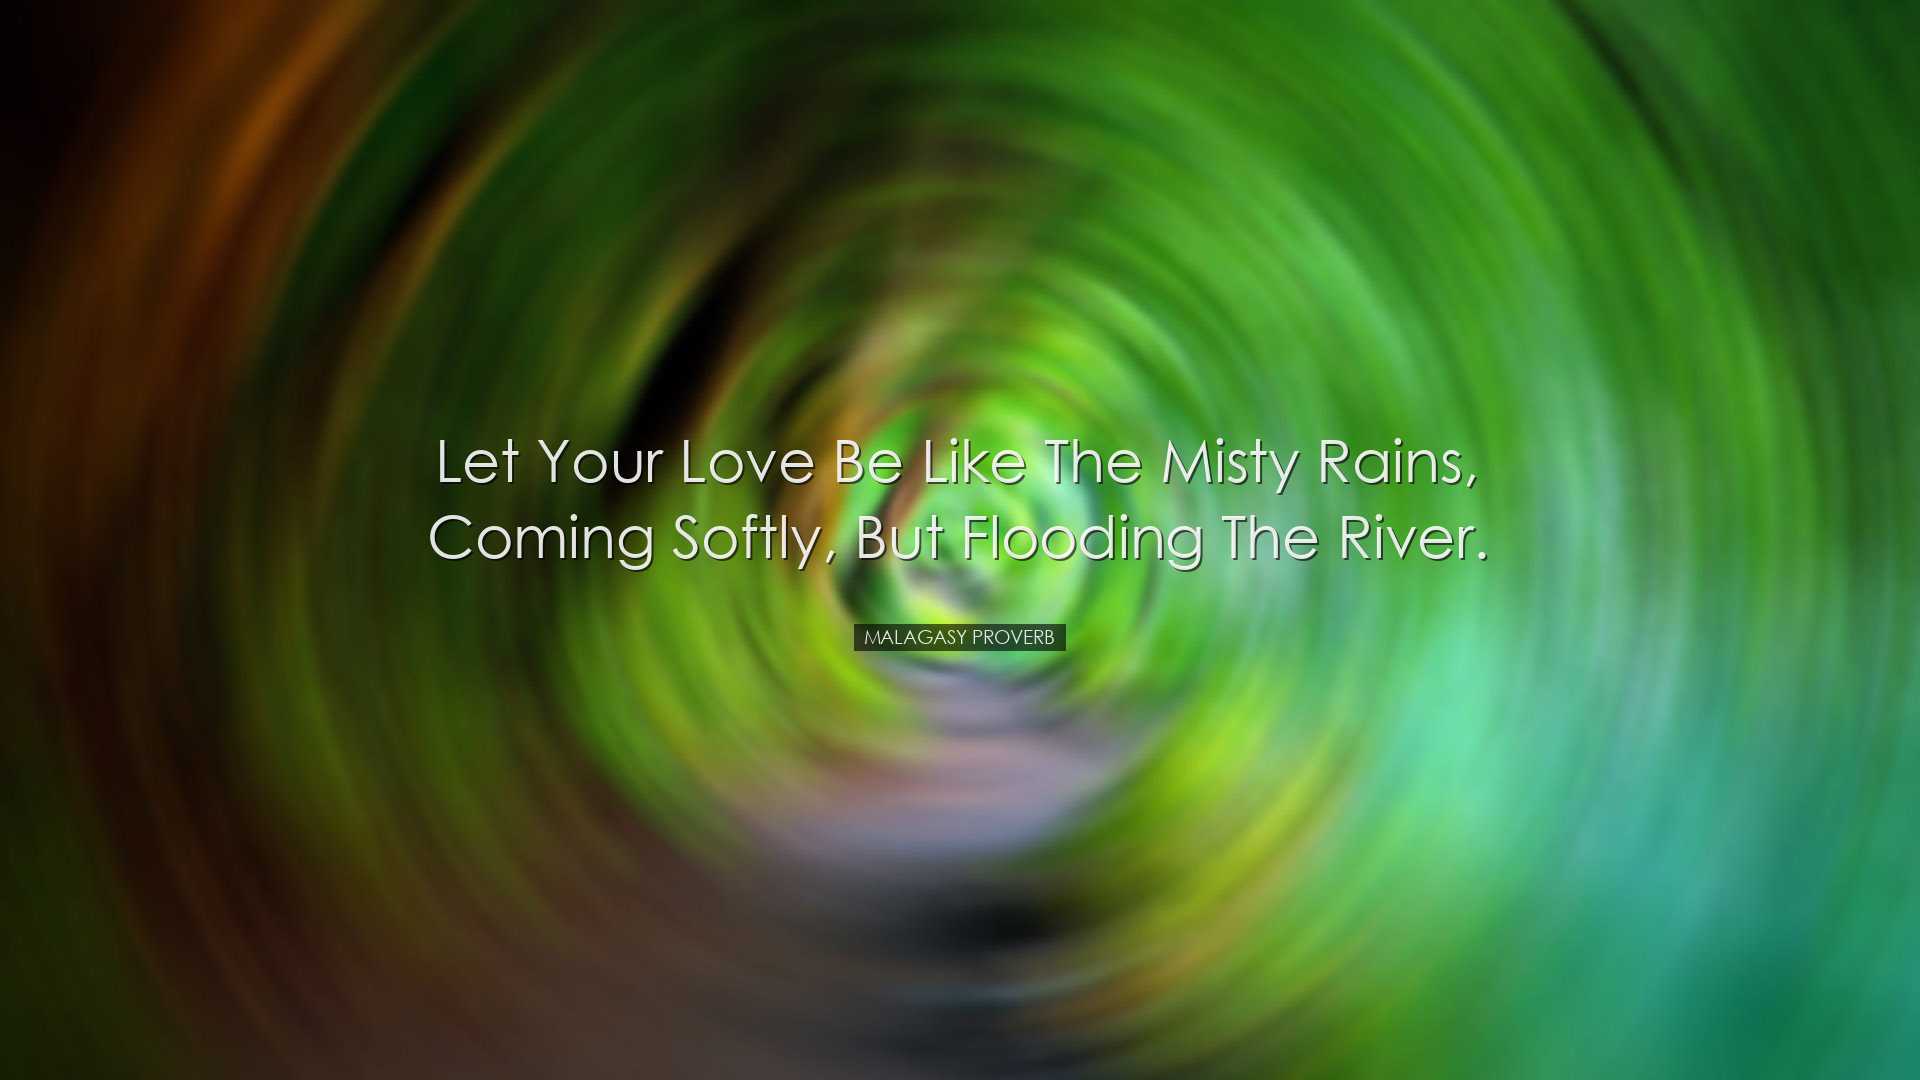 Let your love be like the misty rains, coming softly, but flooding